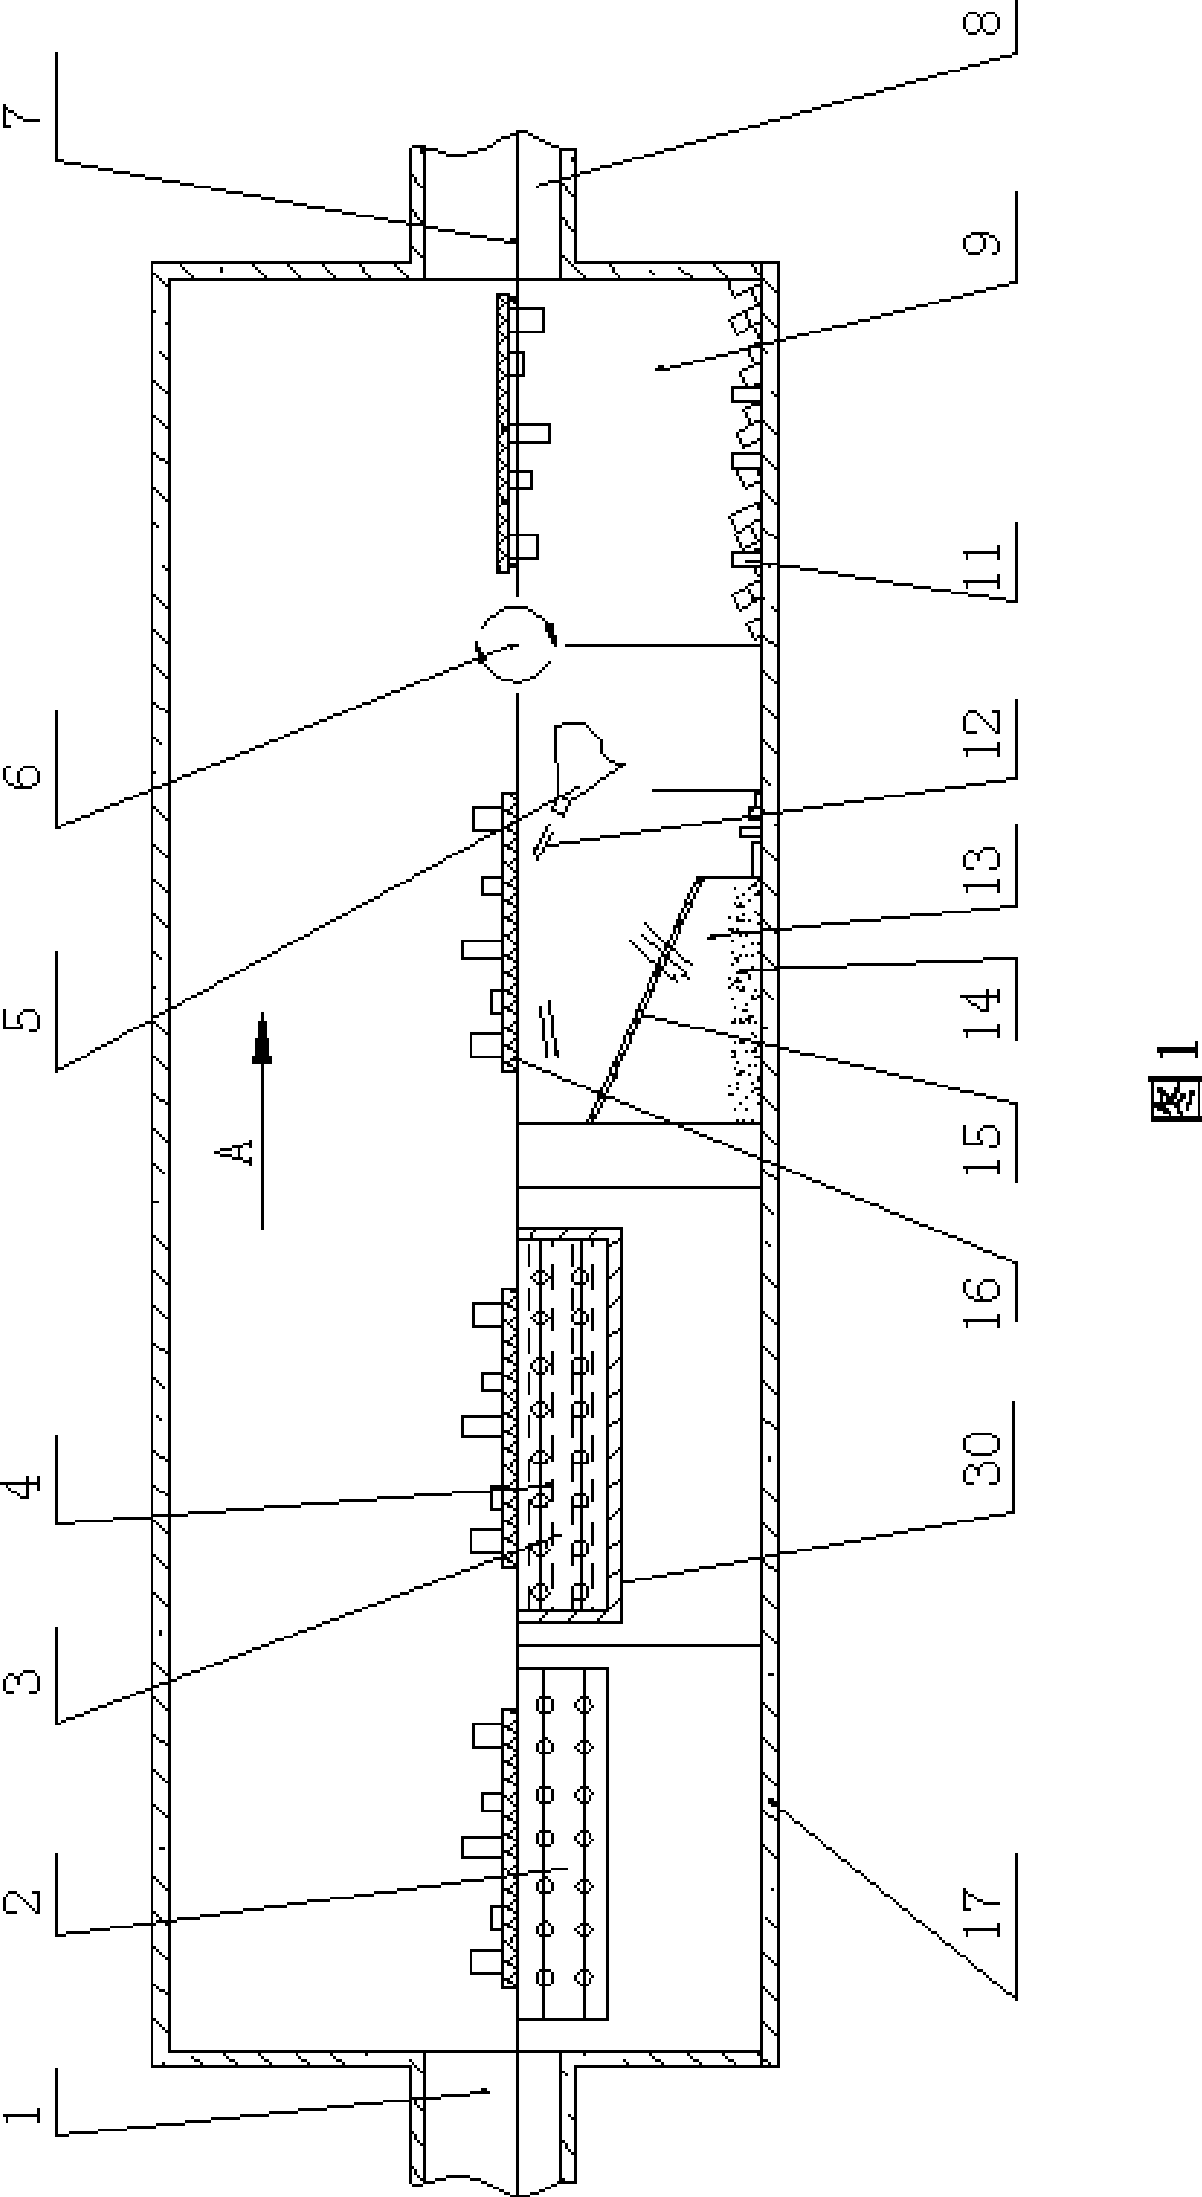 Circuit board element dismounting device